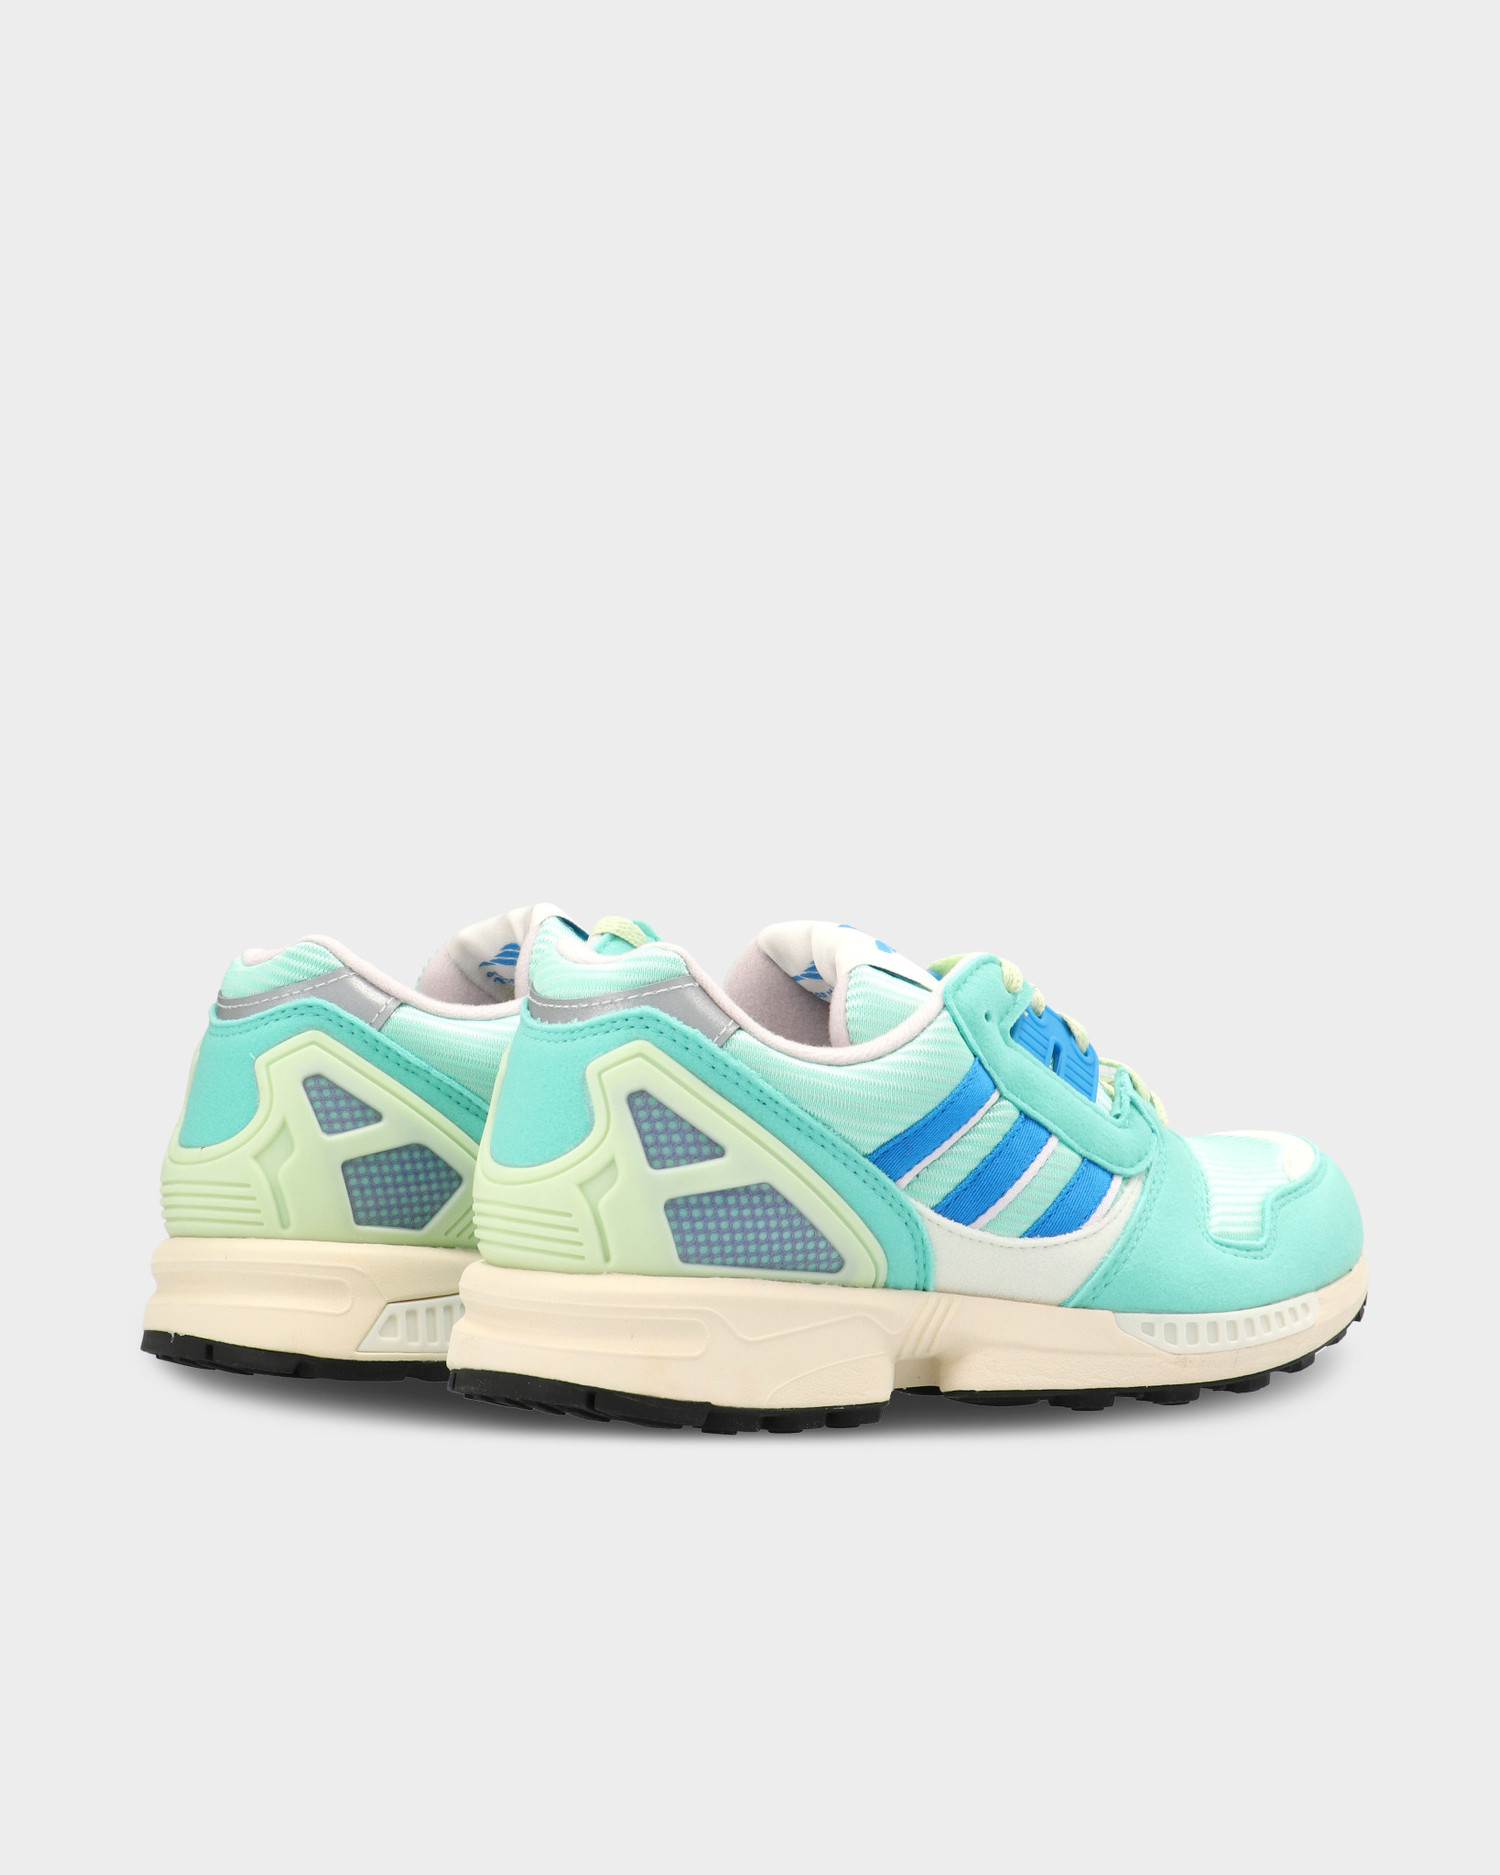 Adidas ZX 8000 Almost Lime / Ecru Tint / Blue Rush